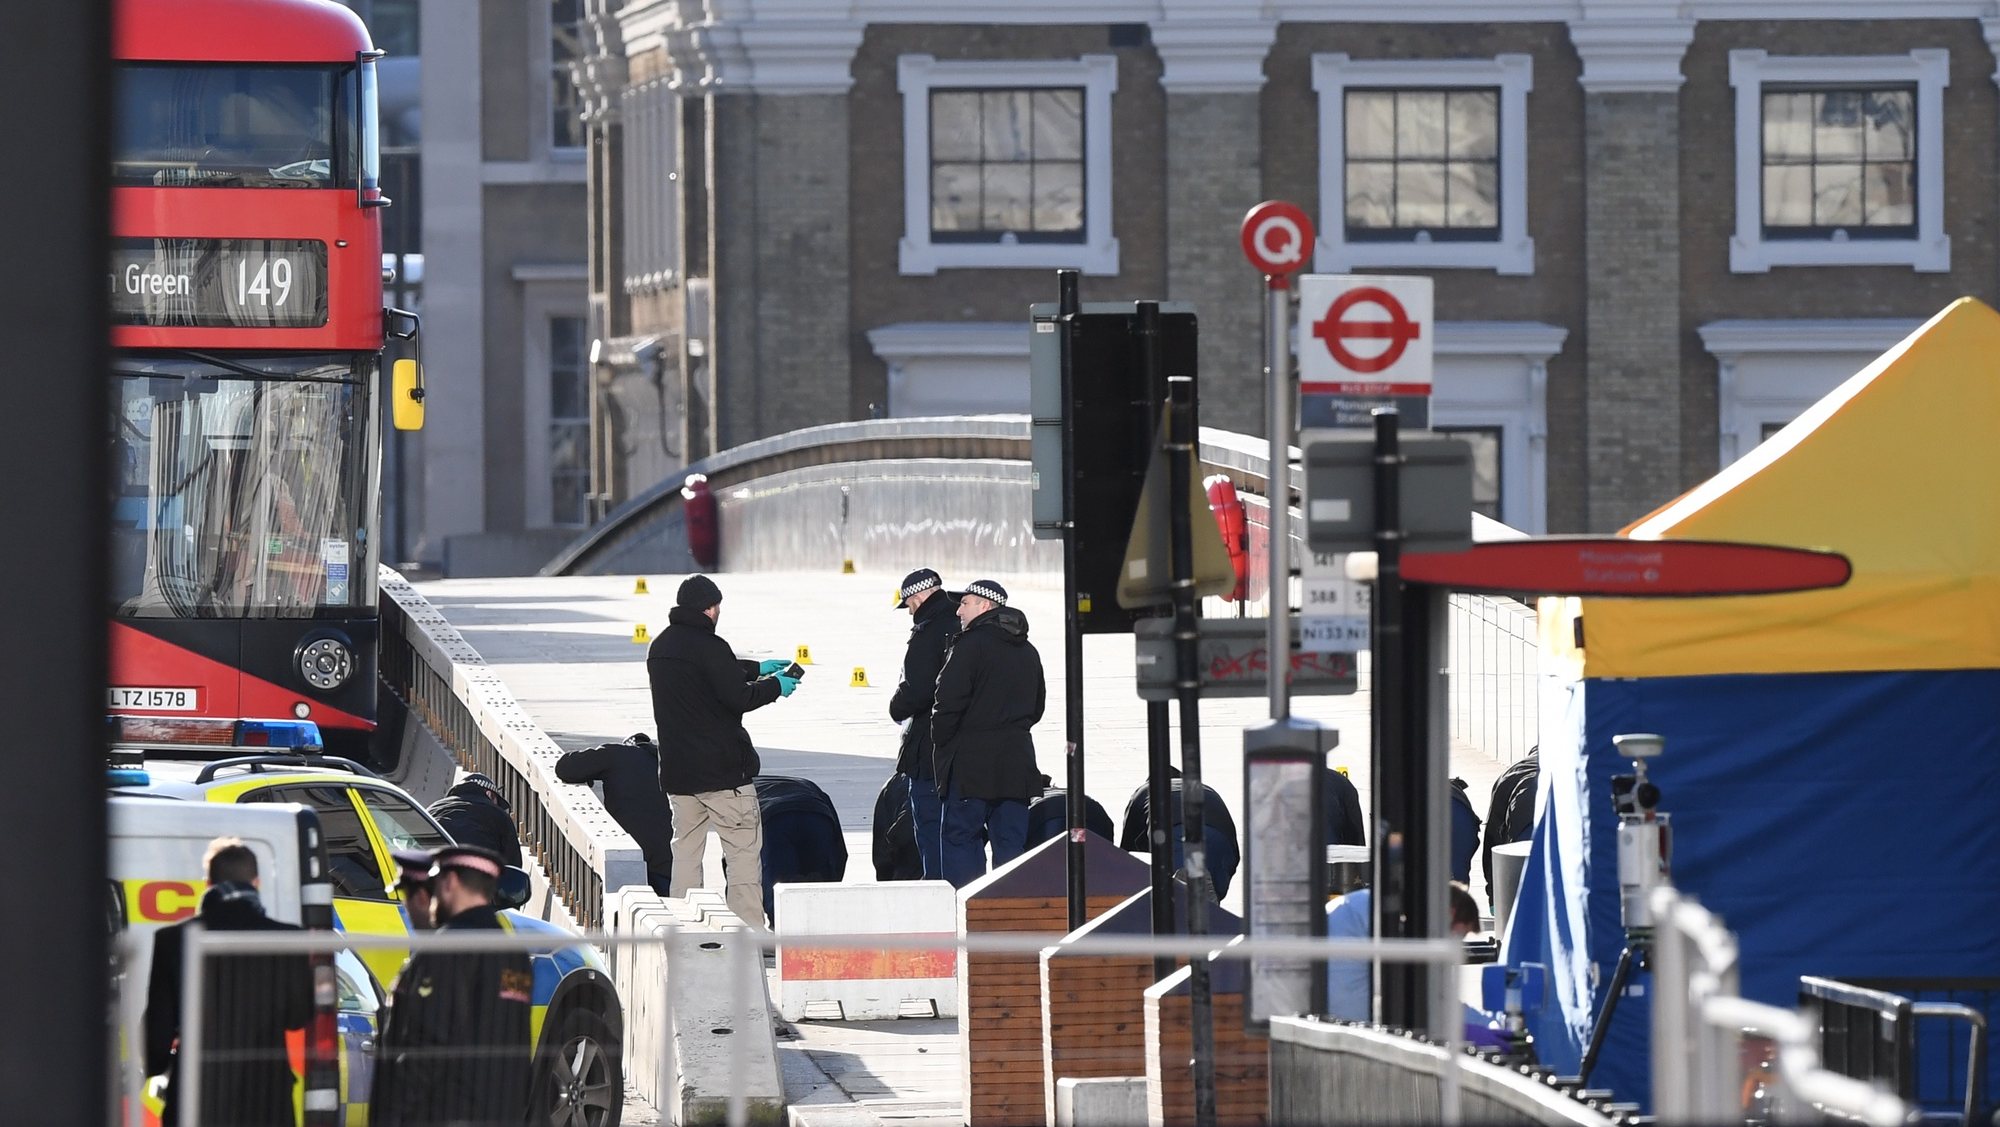 epa08036969 Police at the crime scene at London Bridge in London, Britain,  01 December 2019. At least two members of the public have died and a male suspect has been shot dead by police at a scene on 29 November after a stabbing at London Bridge.  EPA/FACUNDO ARRIZABALAGA